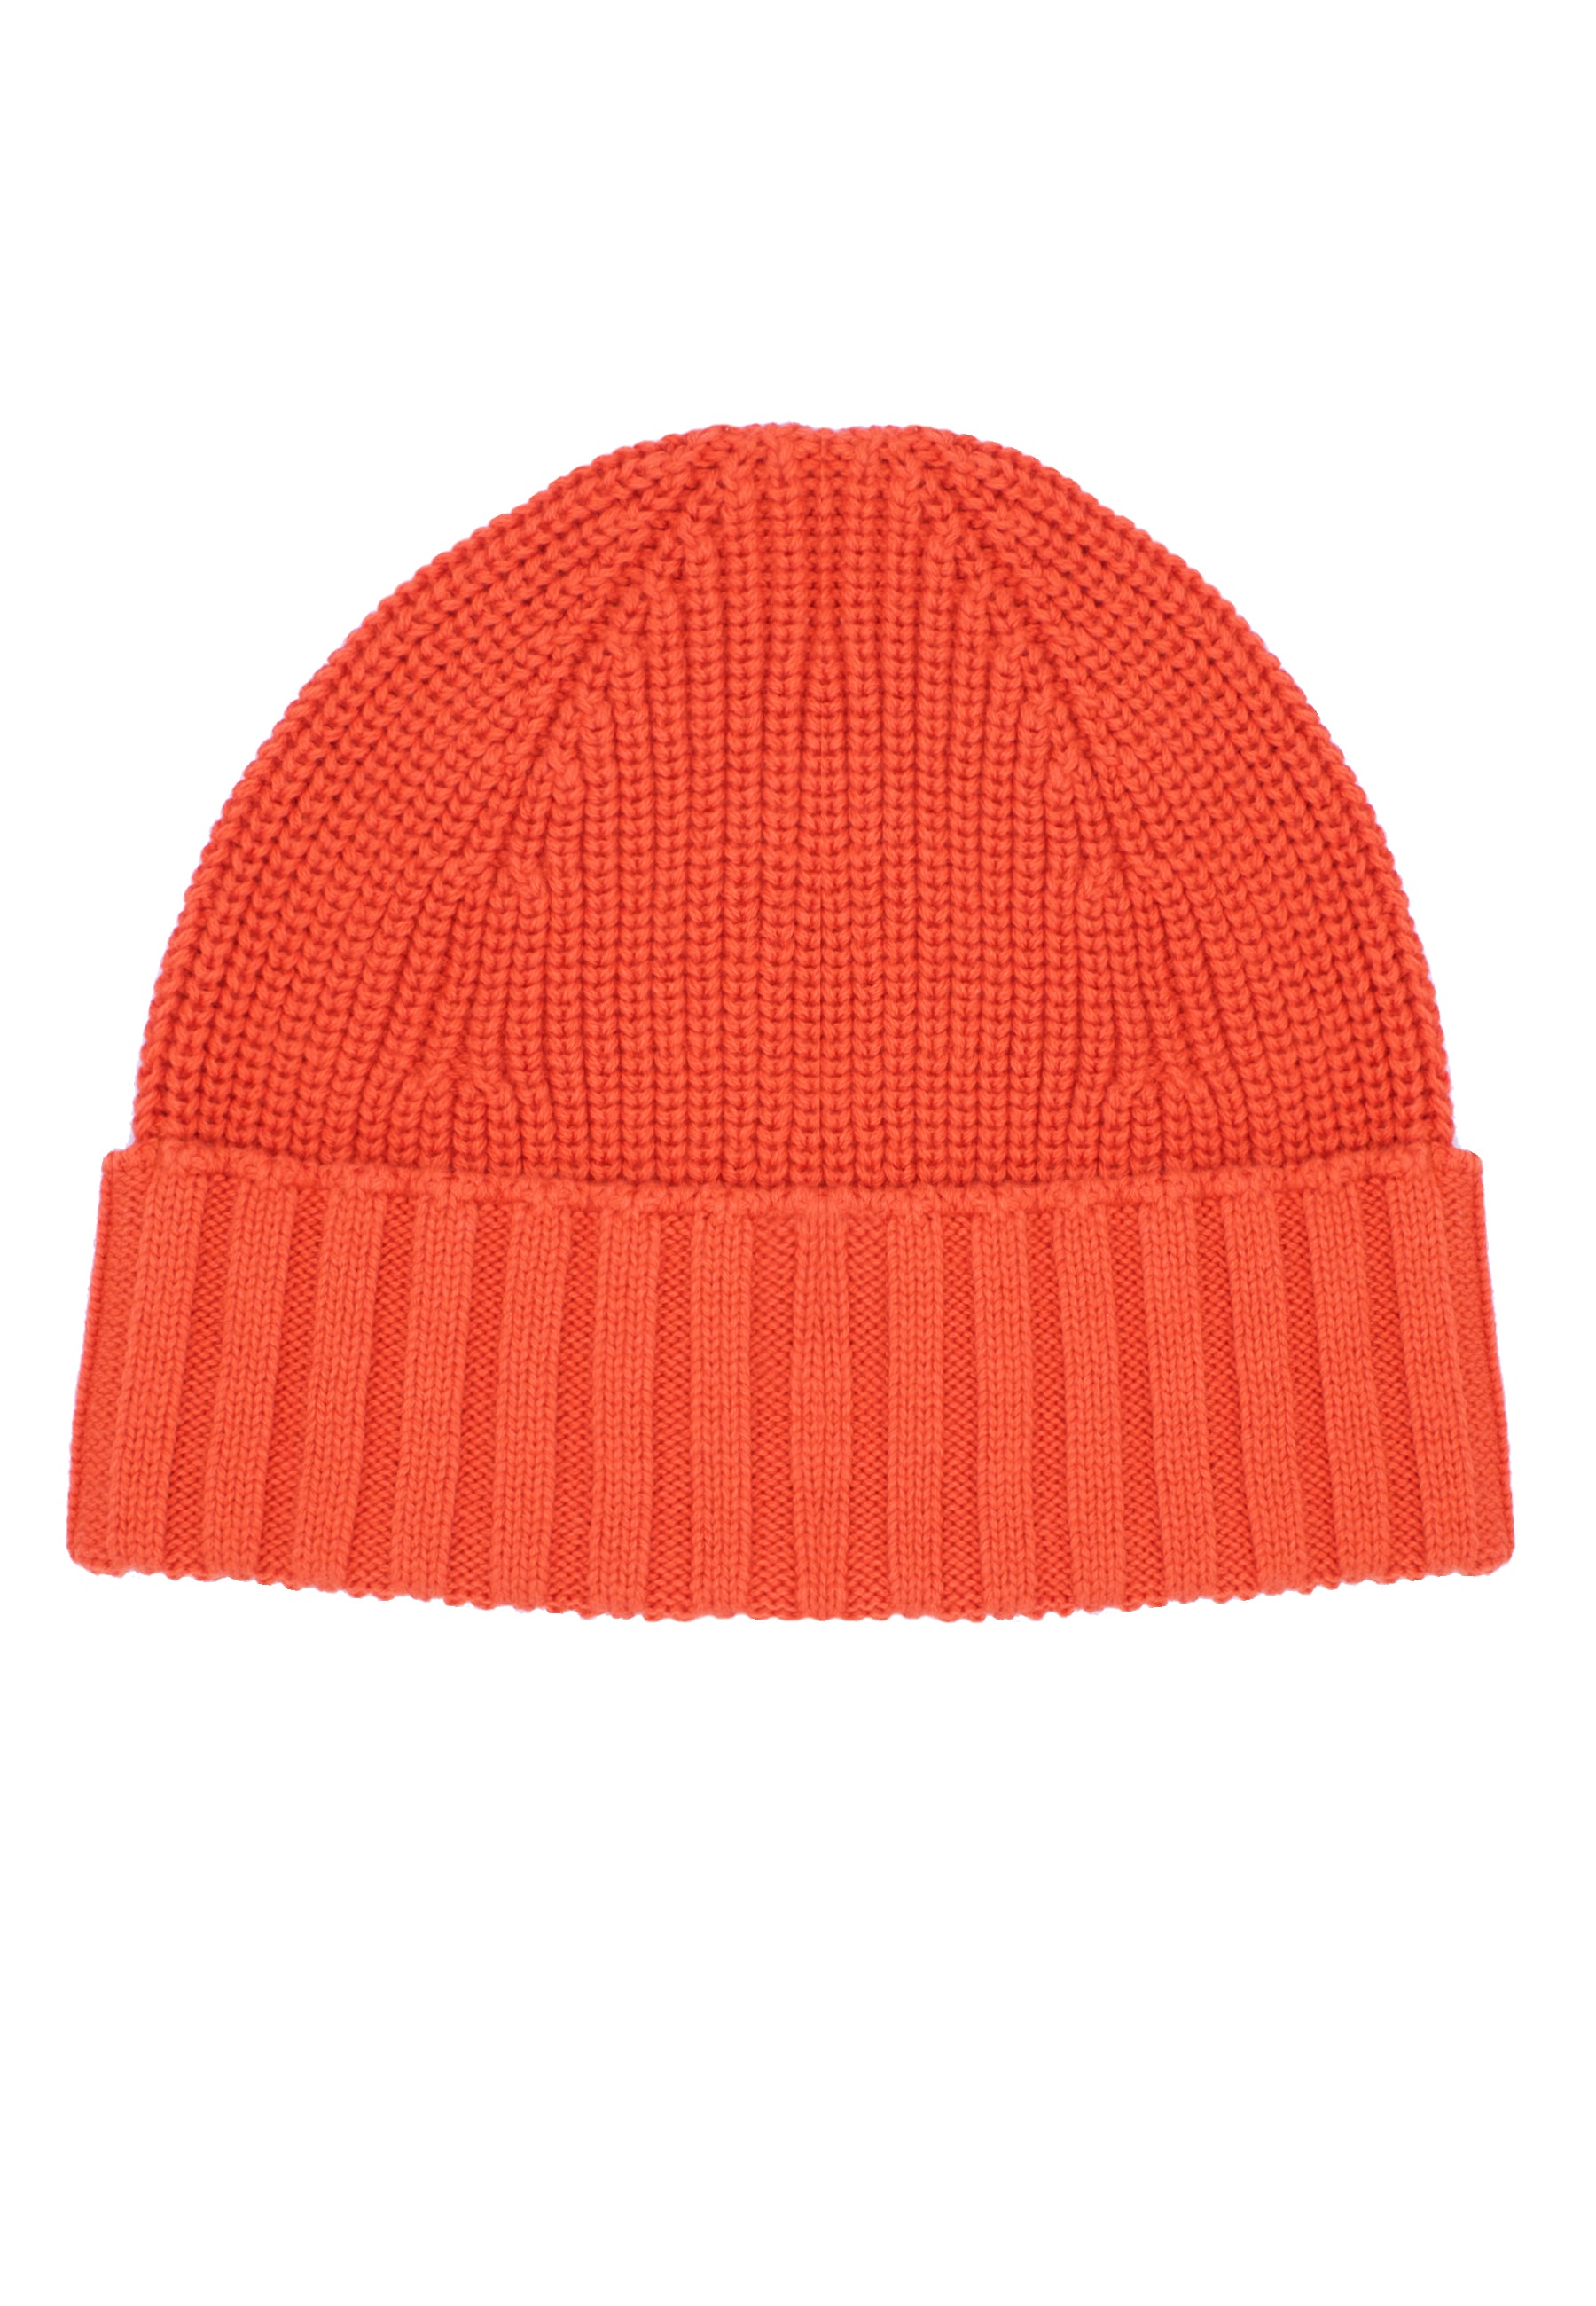 Organic cotton knit hat MORA in red